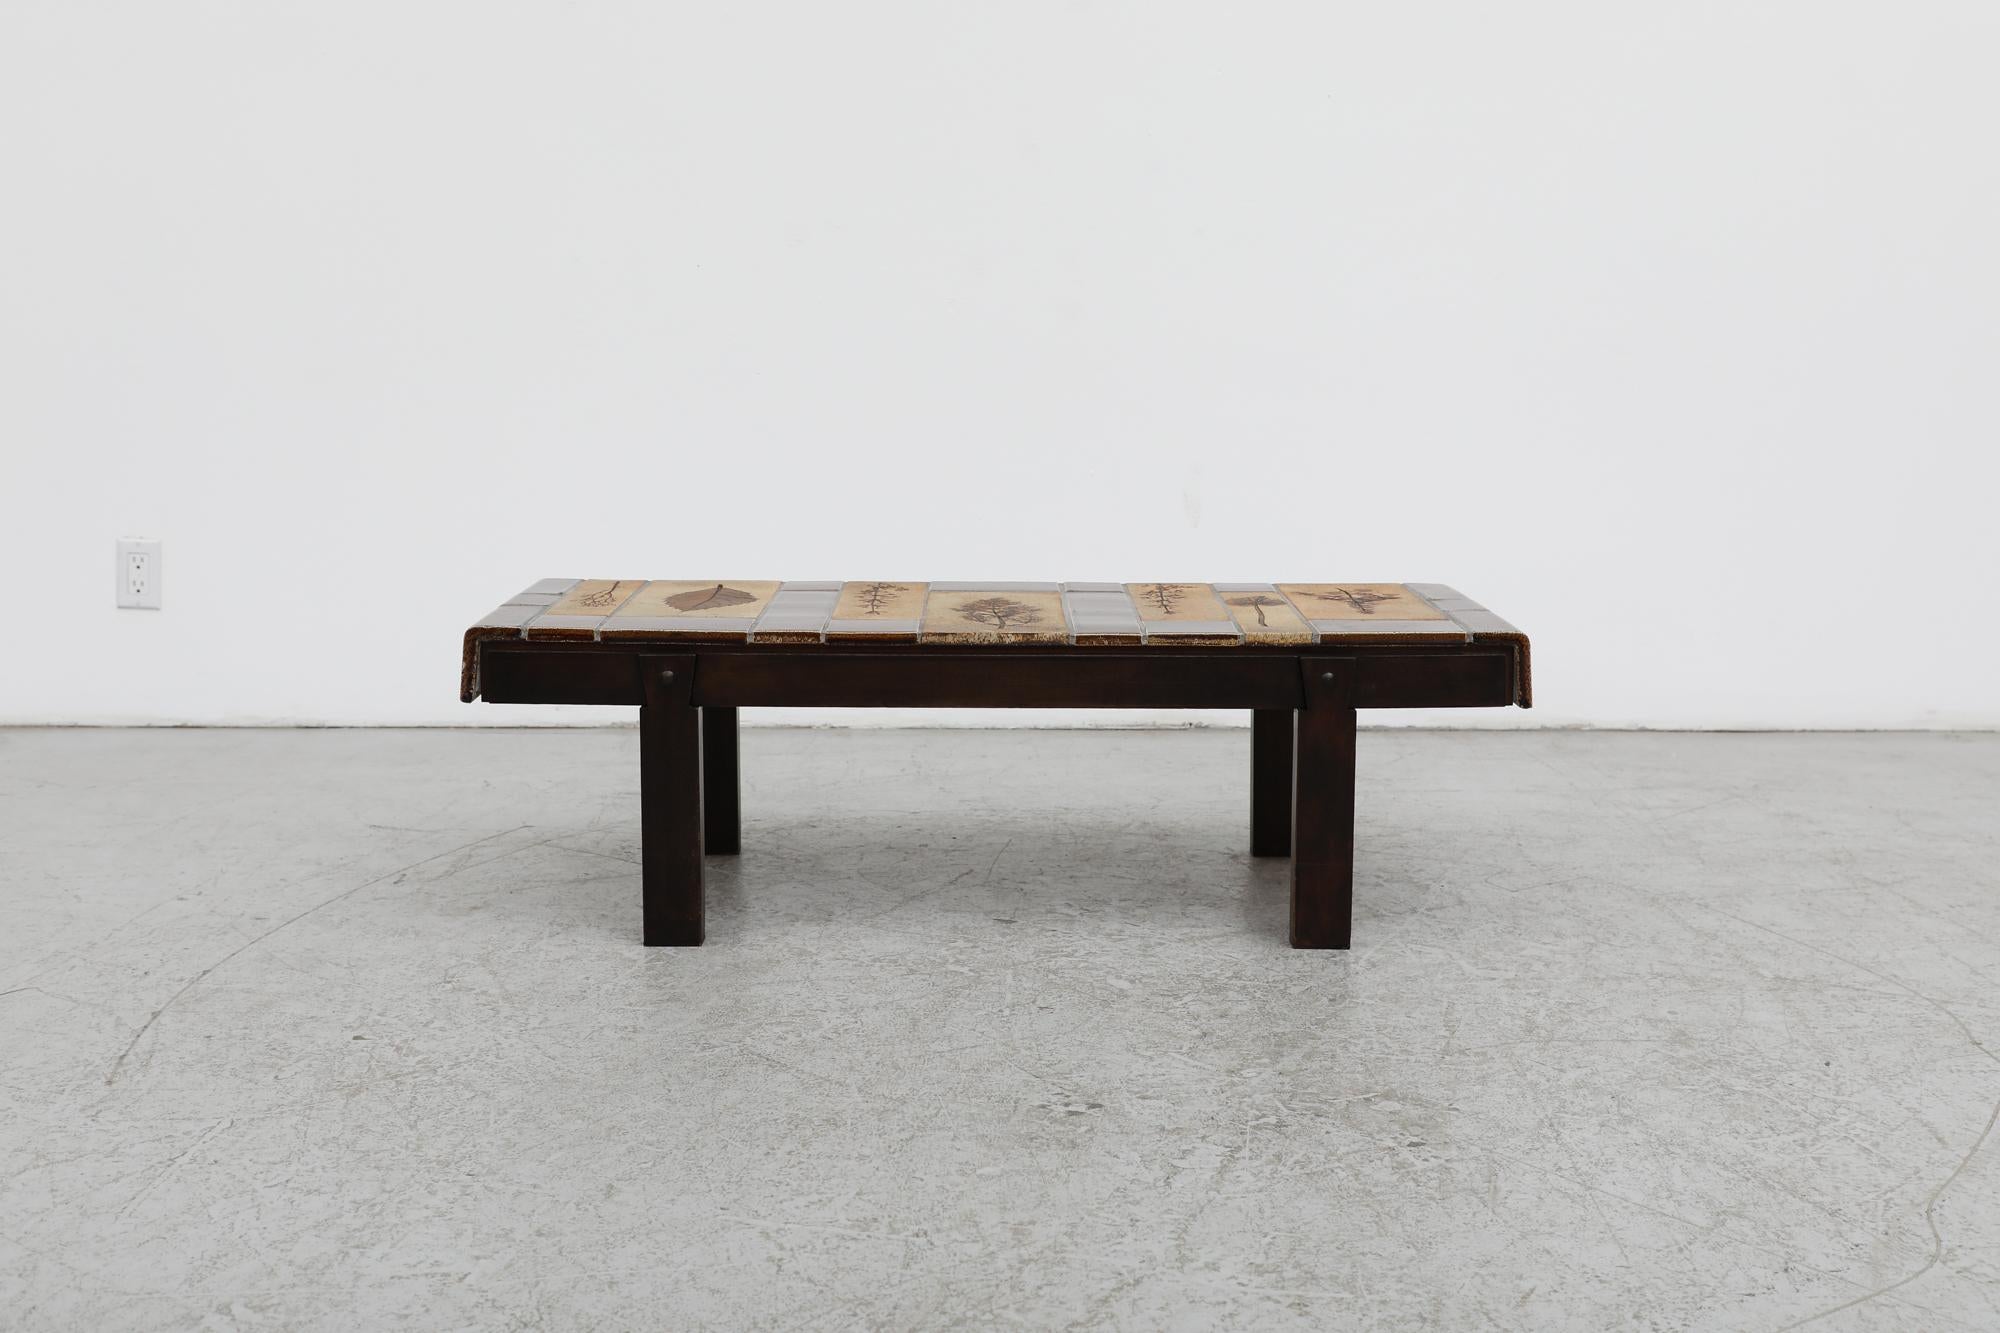 Mid-century Roger Capron 'GARRIGUE' coffee table with rectangular wood frame and pressed leaf tile work from Vallauris, France. A major contributor to the french ceramics golden age this table exemplifies Capron's passion for ceramic arts and